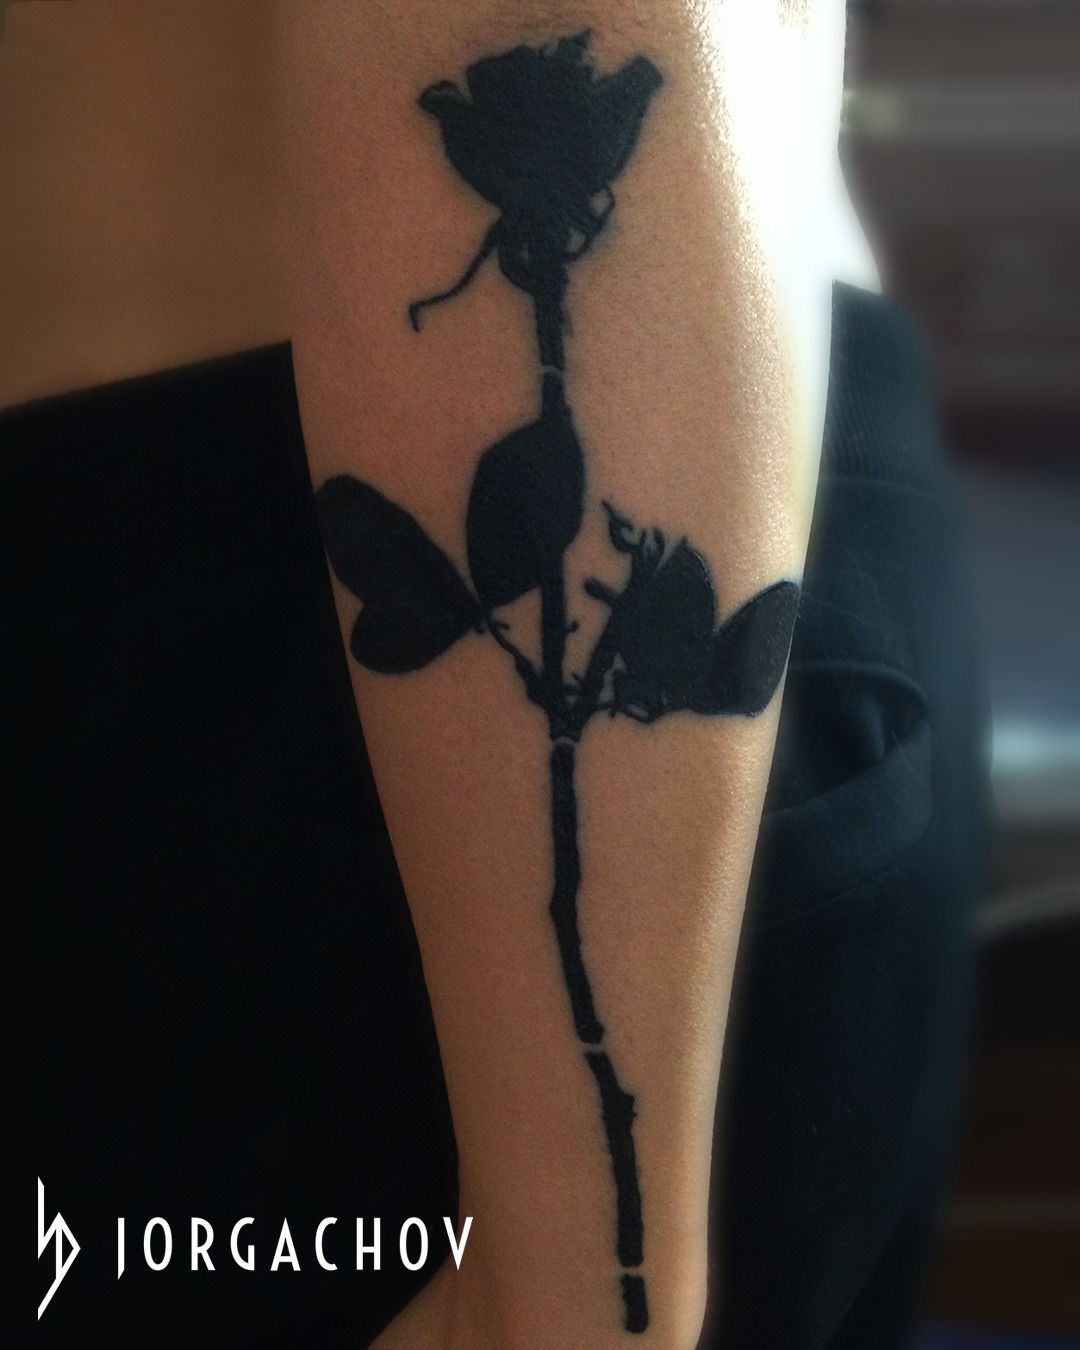 Depeche Mode  How do you express your love for Depeche Mode Heres the  latest addition to my tattoo collection worth every bit of the pain I  love when people ask what